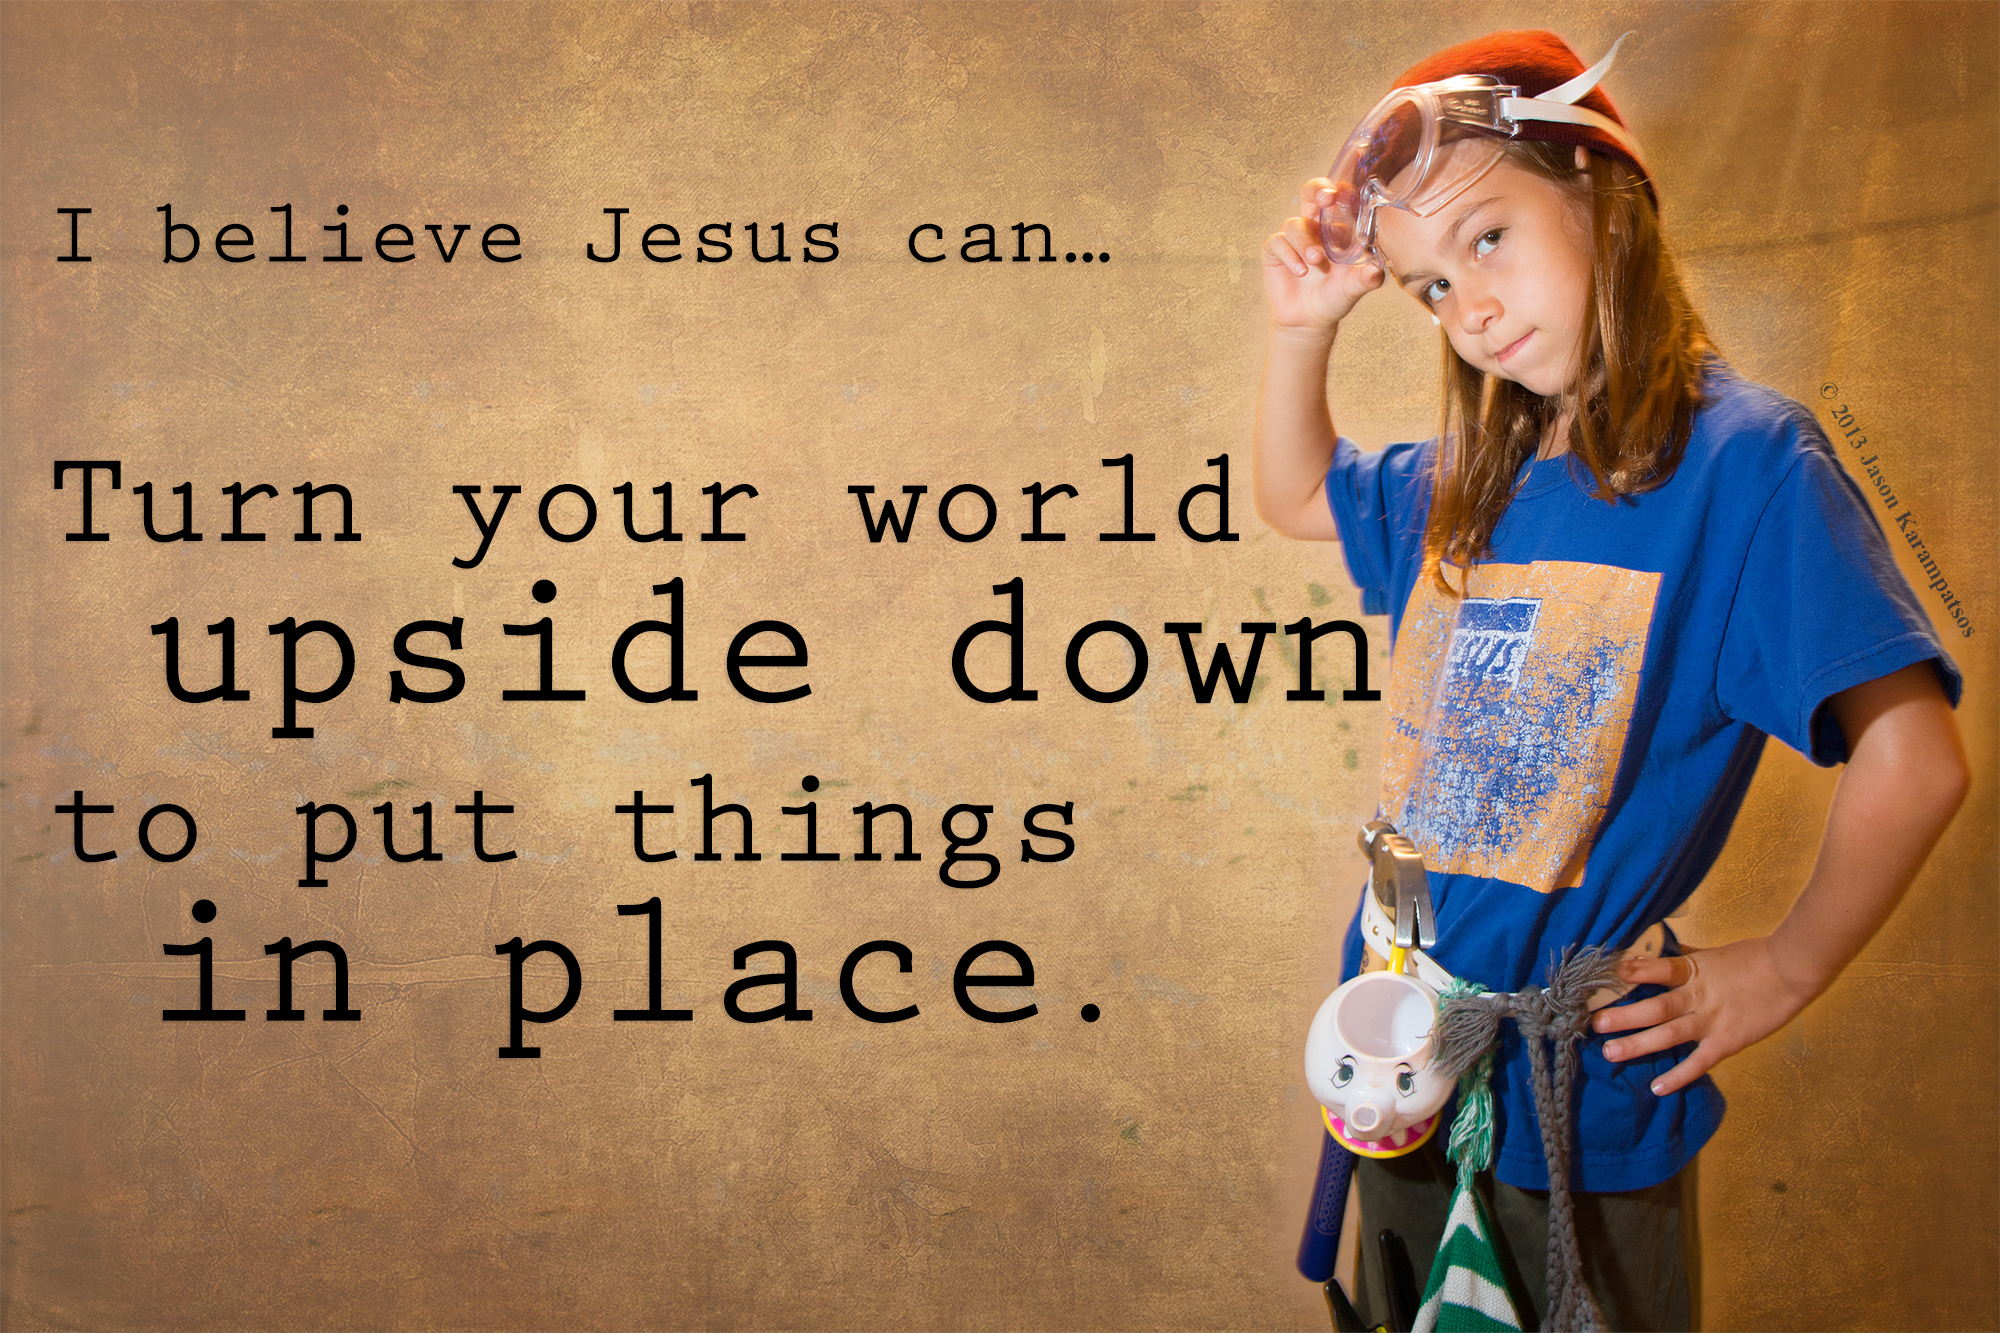 I believe Jesus can…turn your world upside down to put things in place.